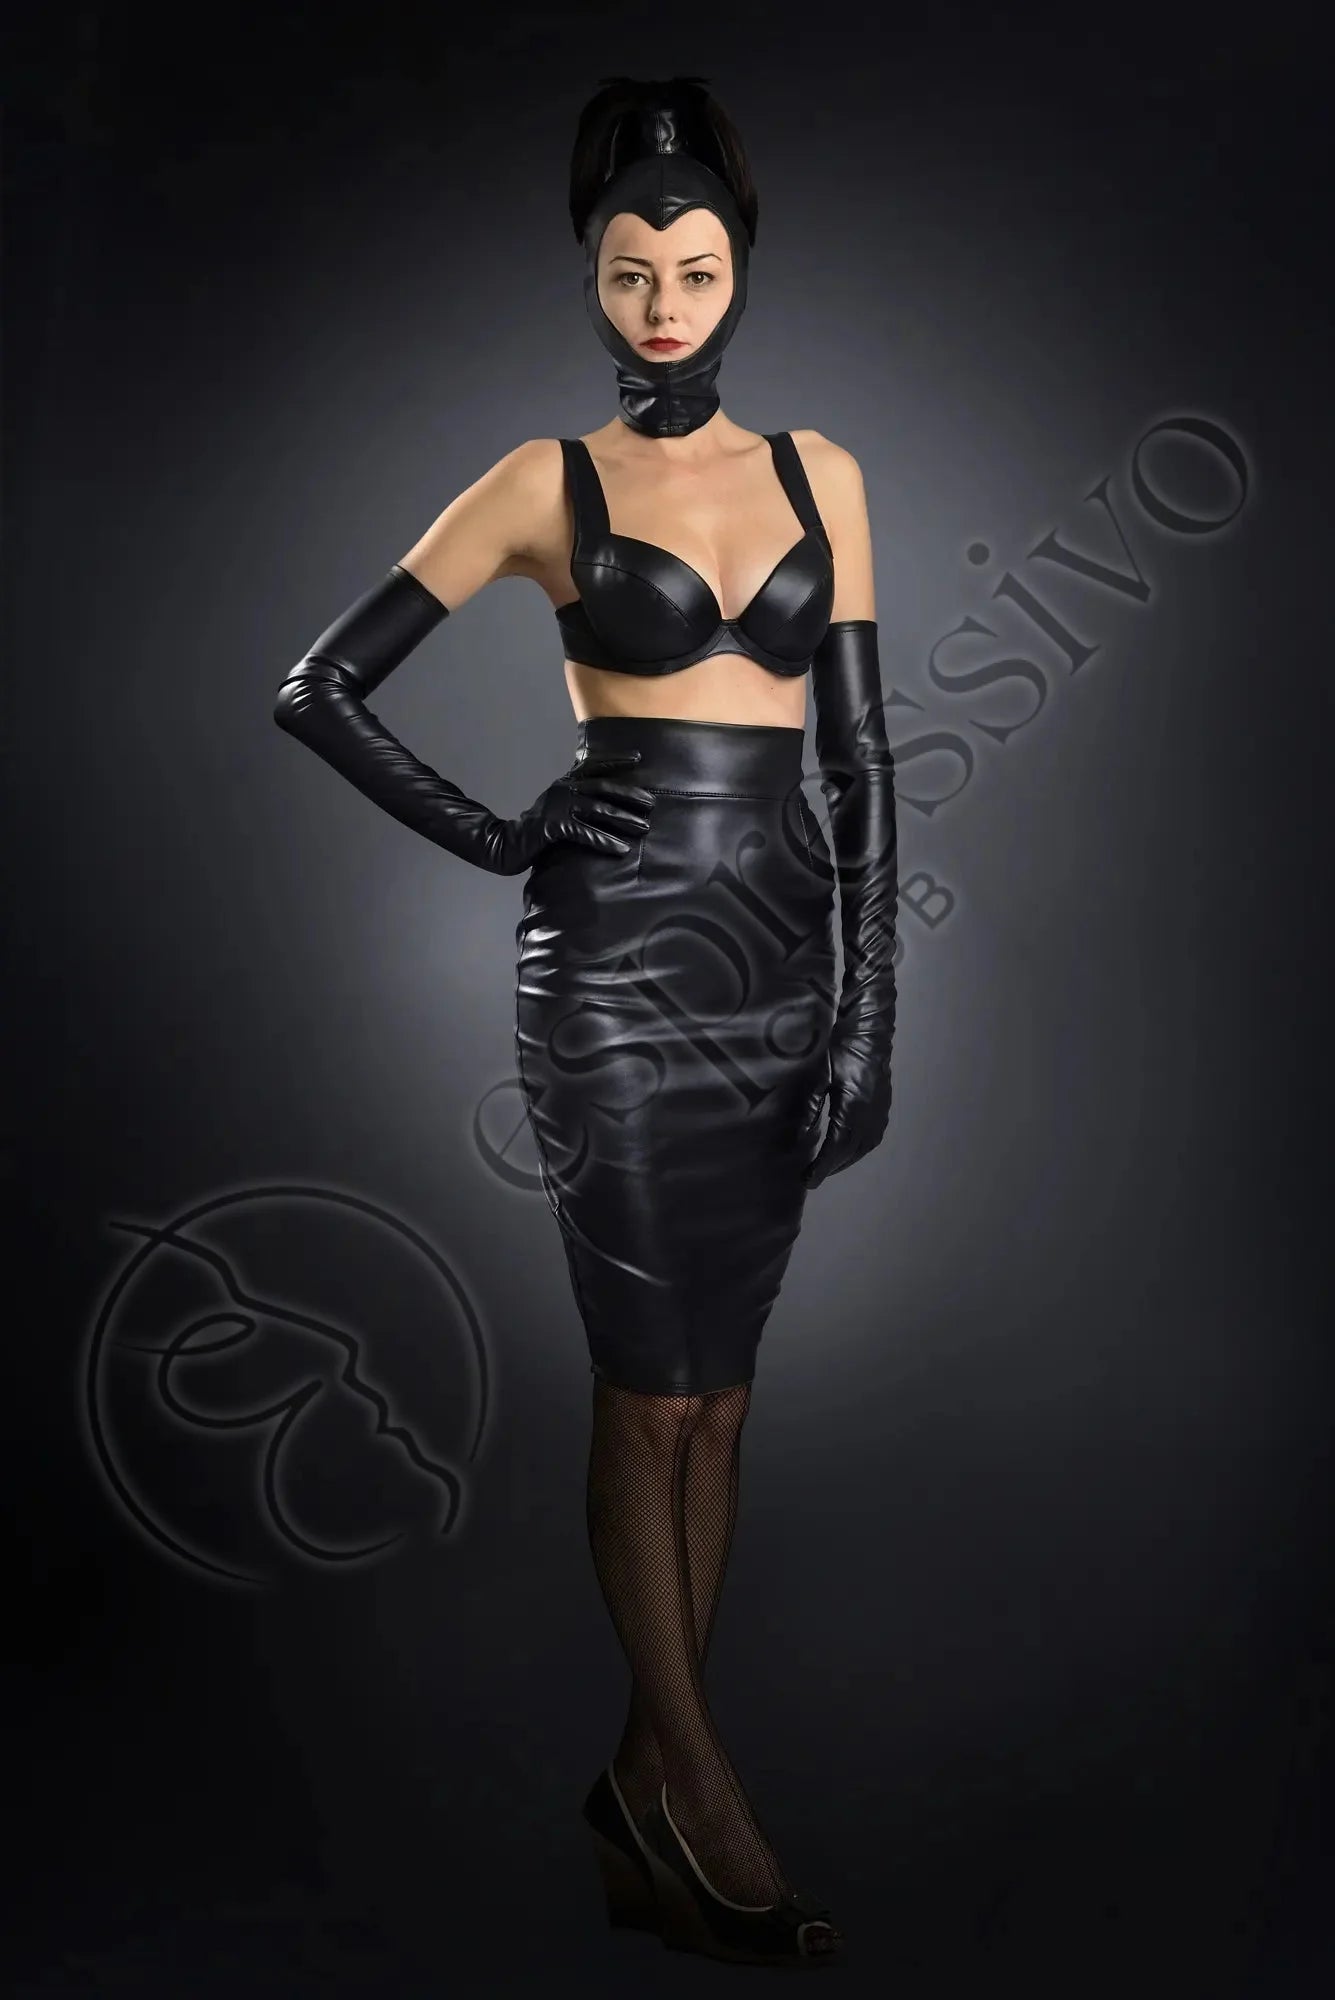 Open Face Bdsm Leather Hood With Ponytail Tube Masks